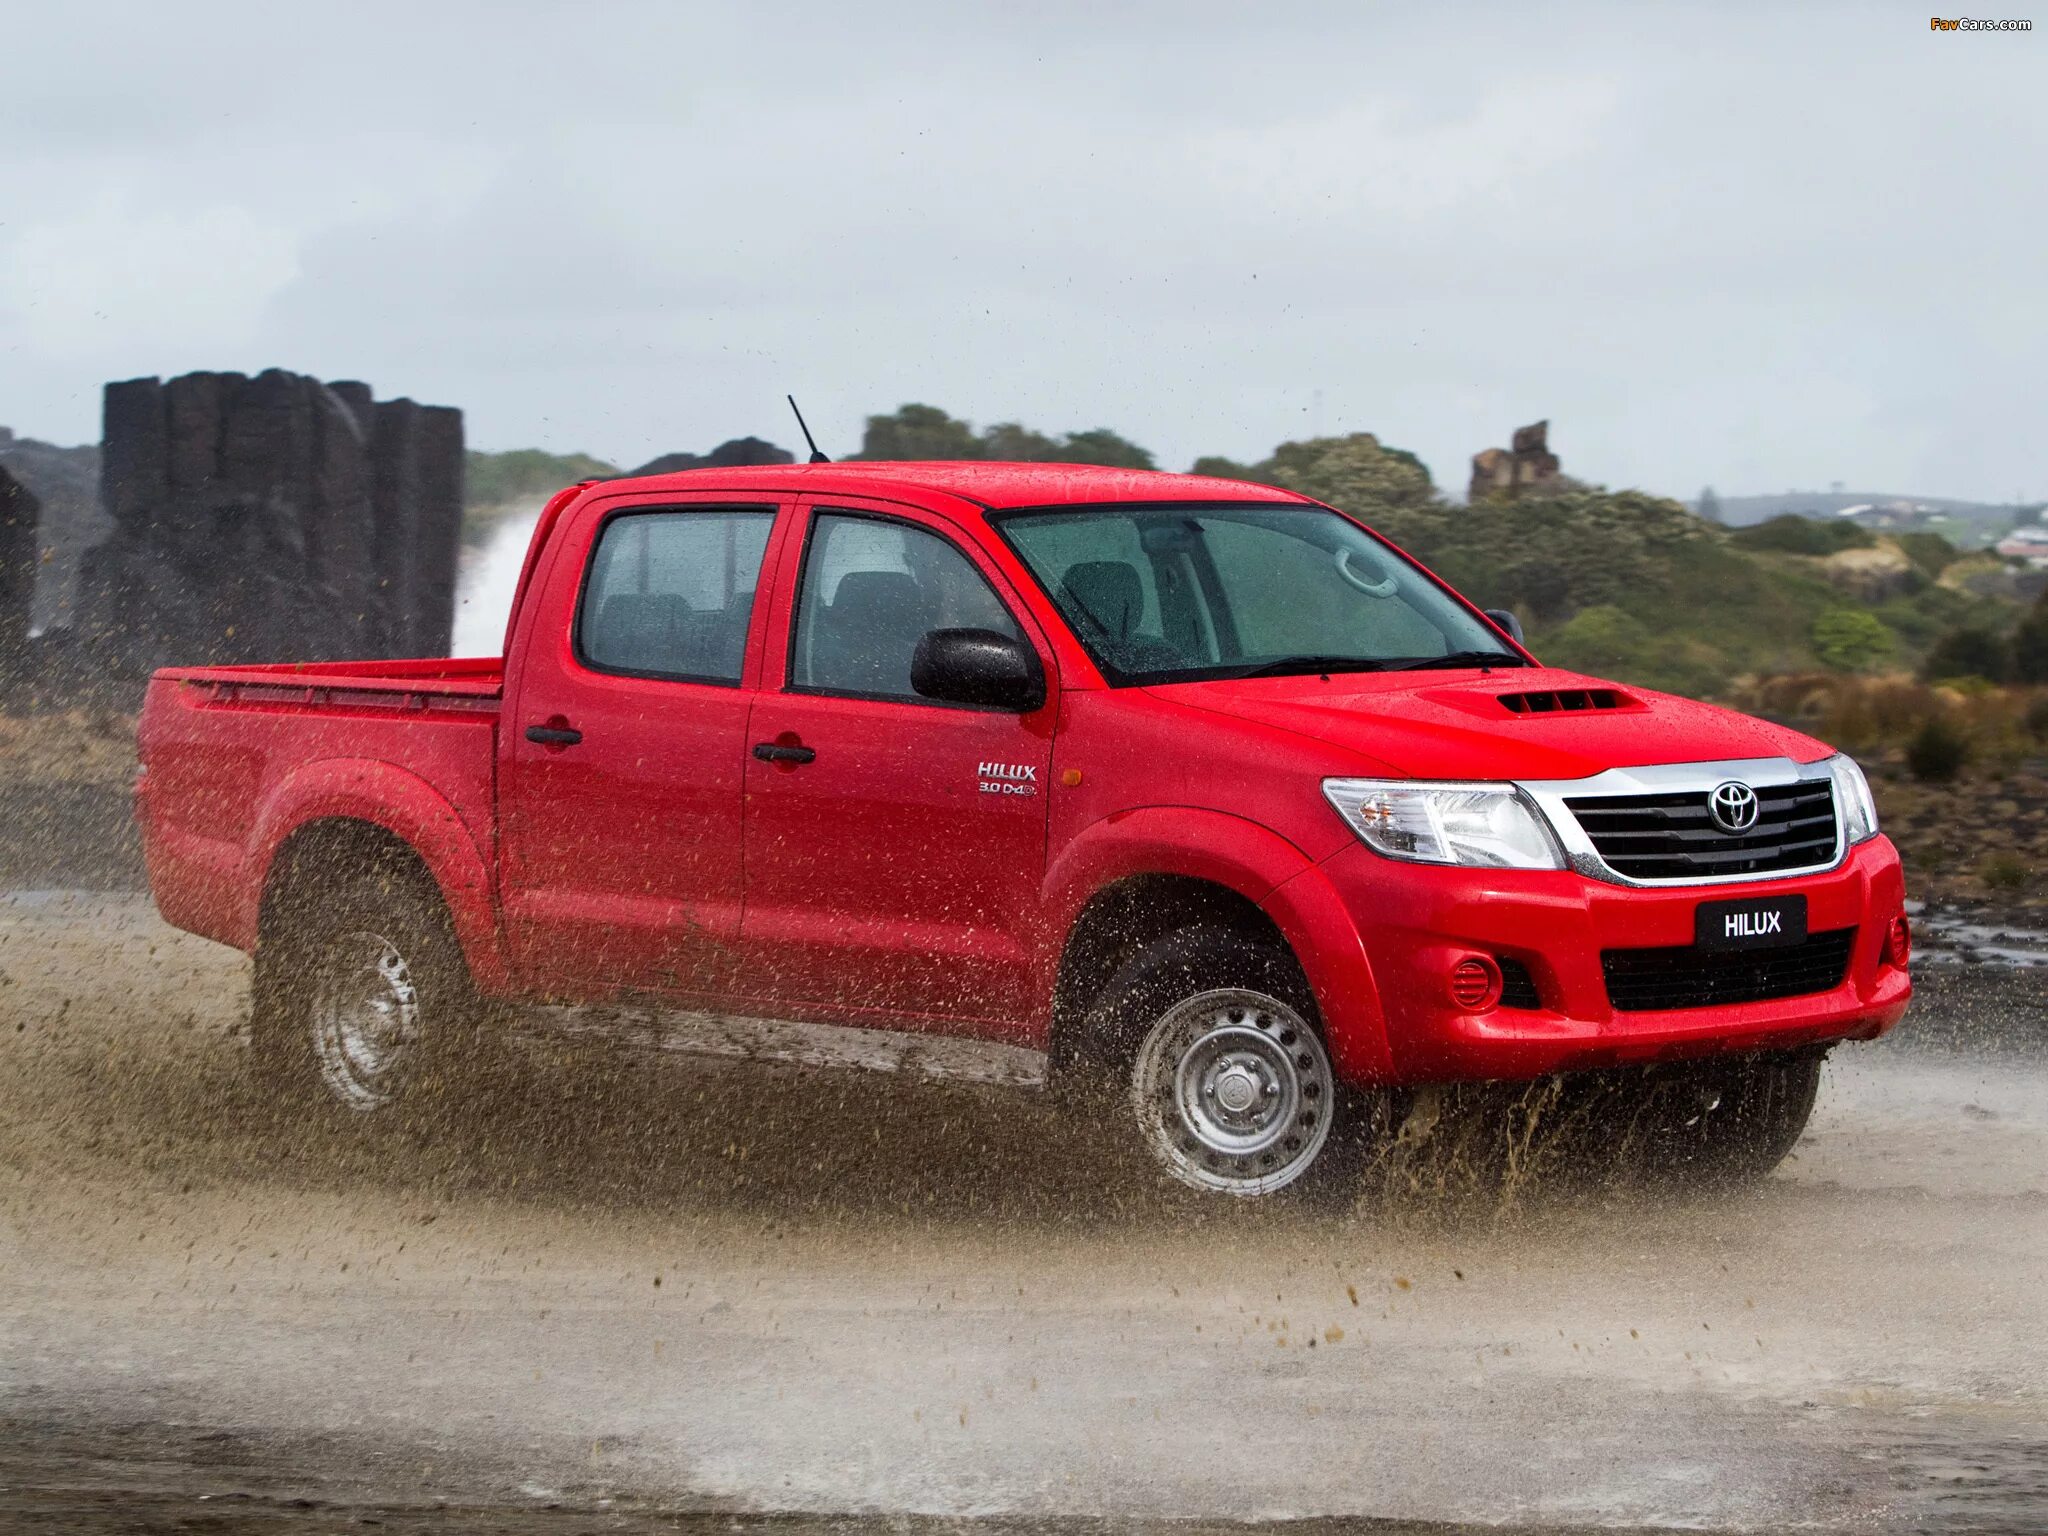 Toyota Hilux 4x4 Double Cab. Red Toyota Hilux. Toyota Hilux 4x4 2014. Hilux Double Cab. Wrong pick up